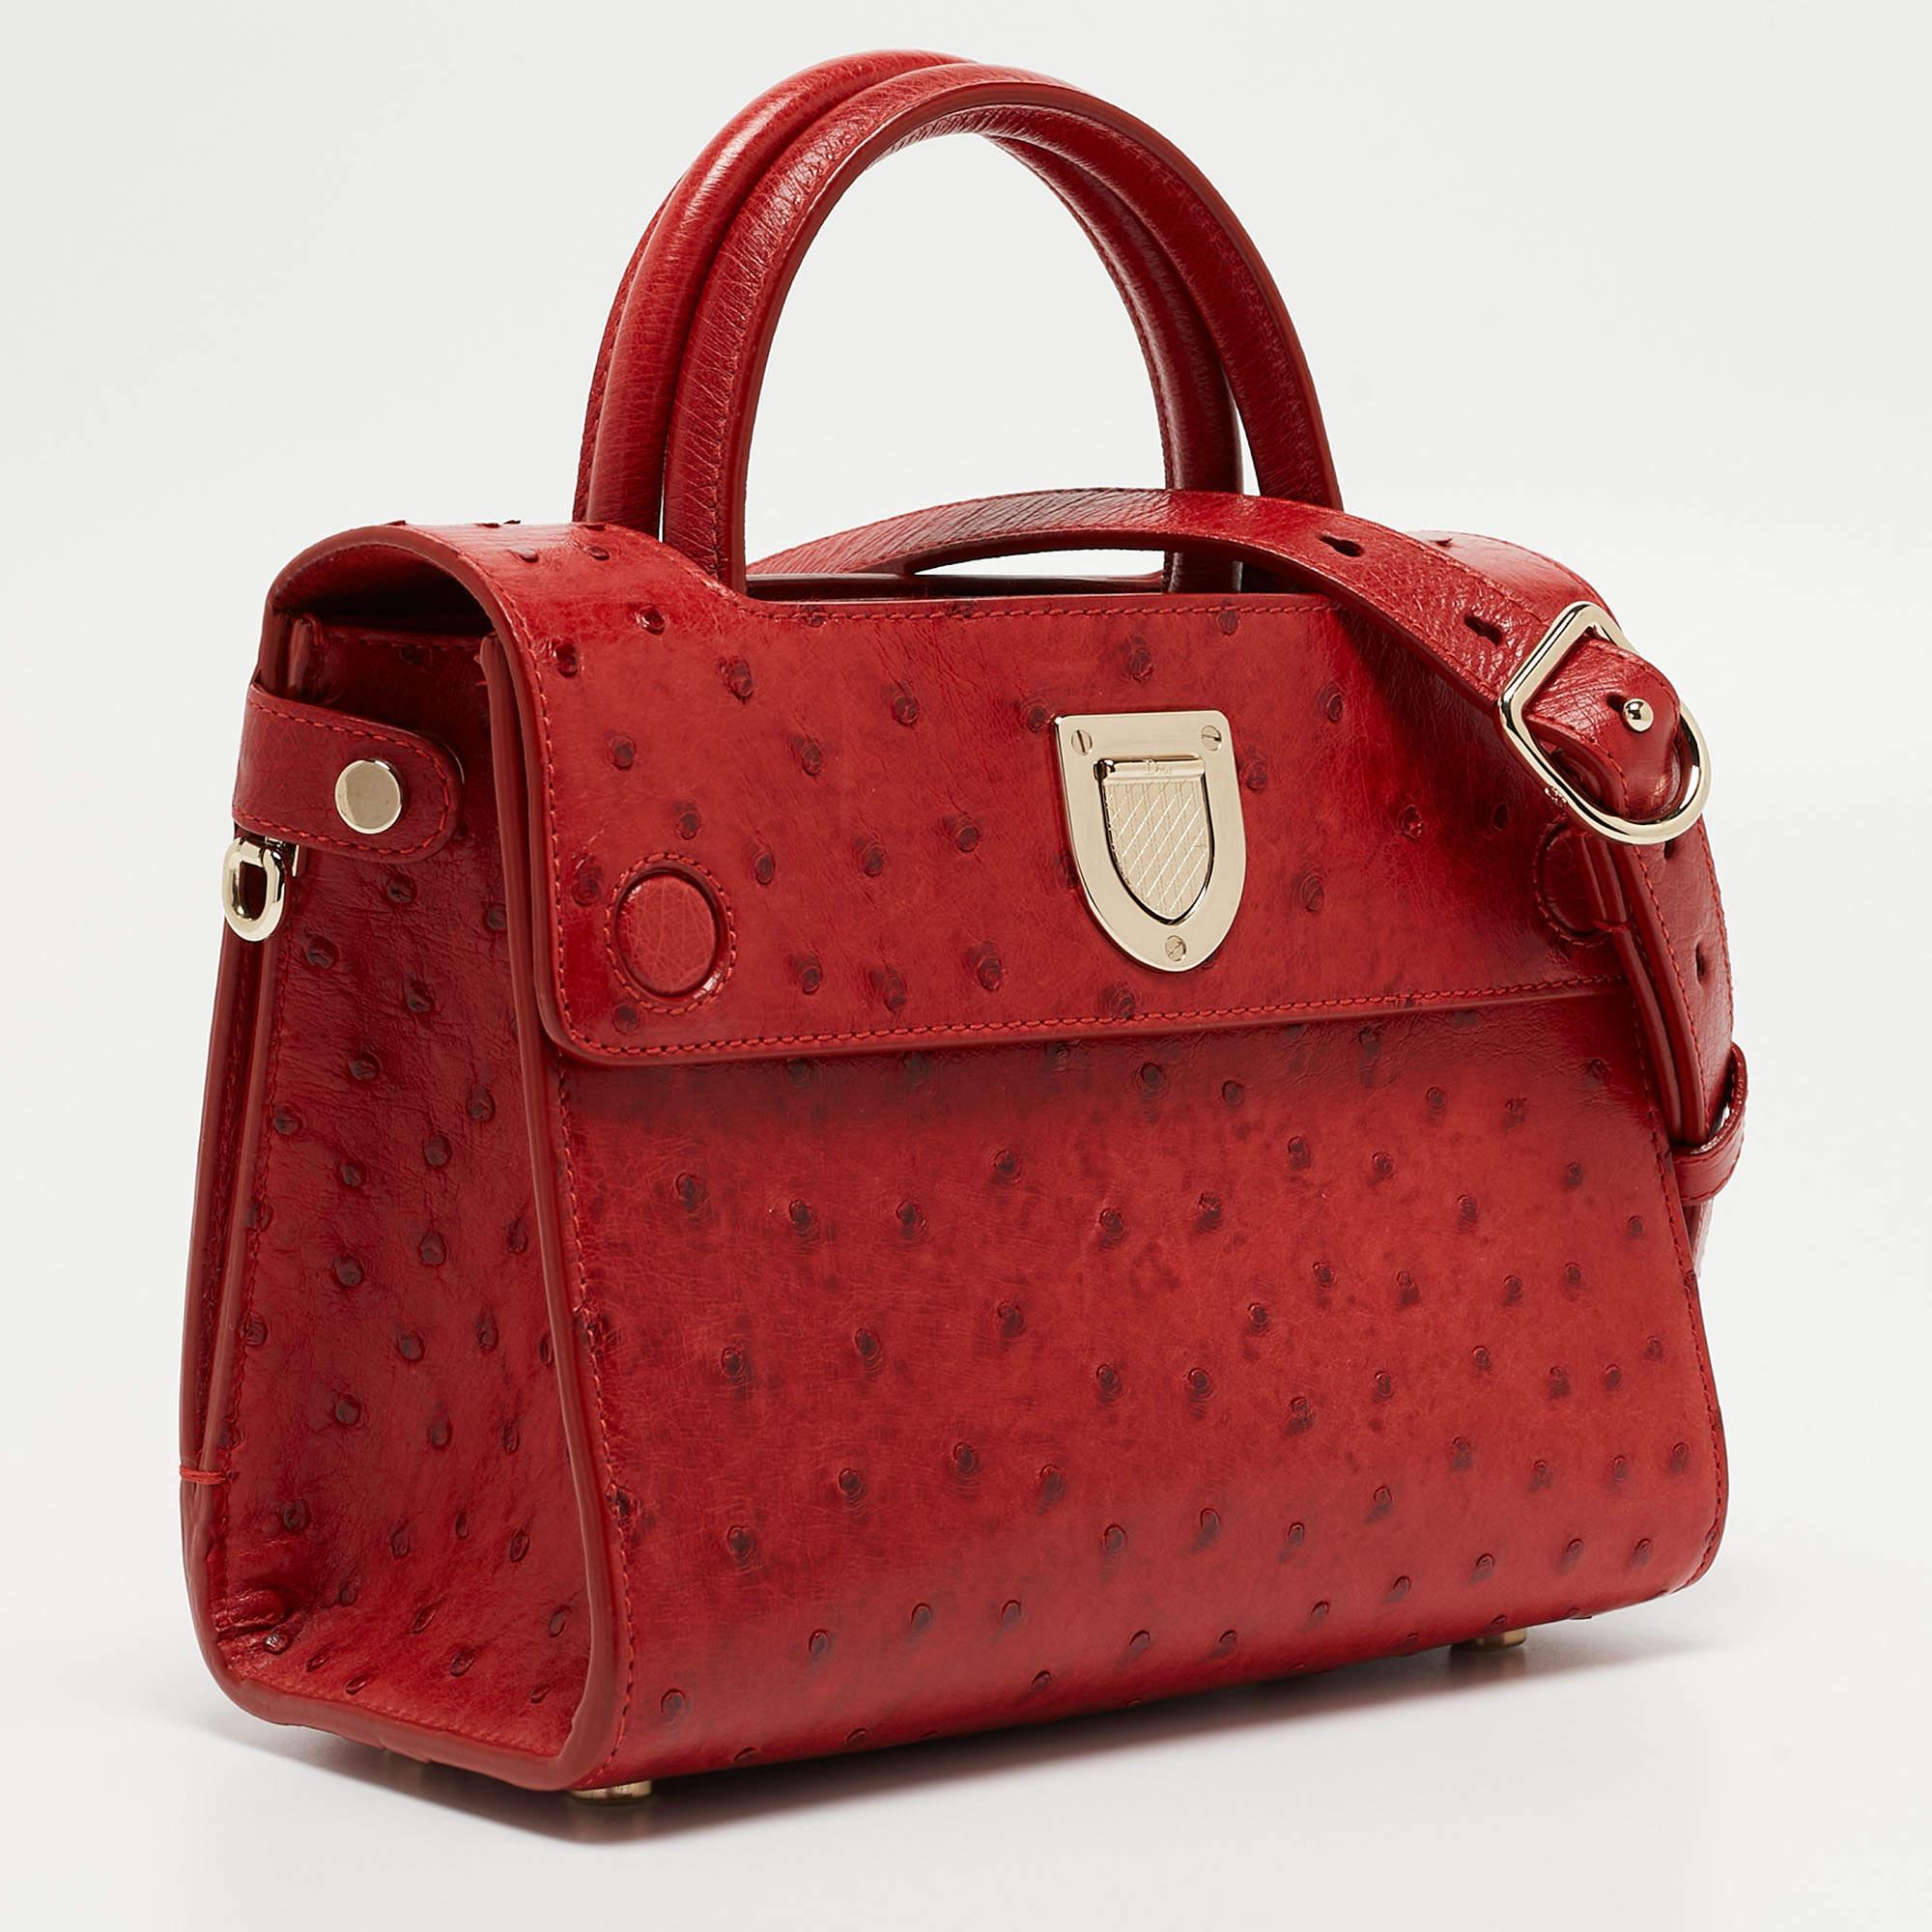 The Dior Diorever tote exudes luxury with its vibrant red ostrich leather and iconic design. The mini size offers a perfect blend of elegance and practicality. The bag features a distinctive crest-shaped clasp, sturdy top handles, and a detachable